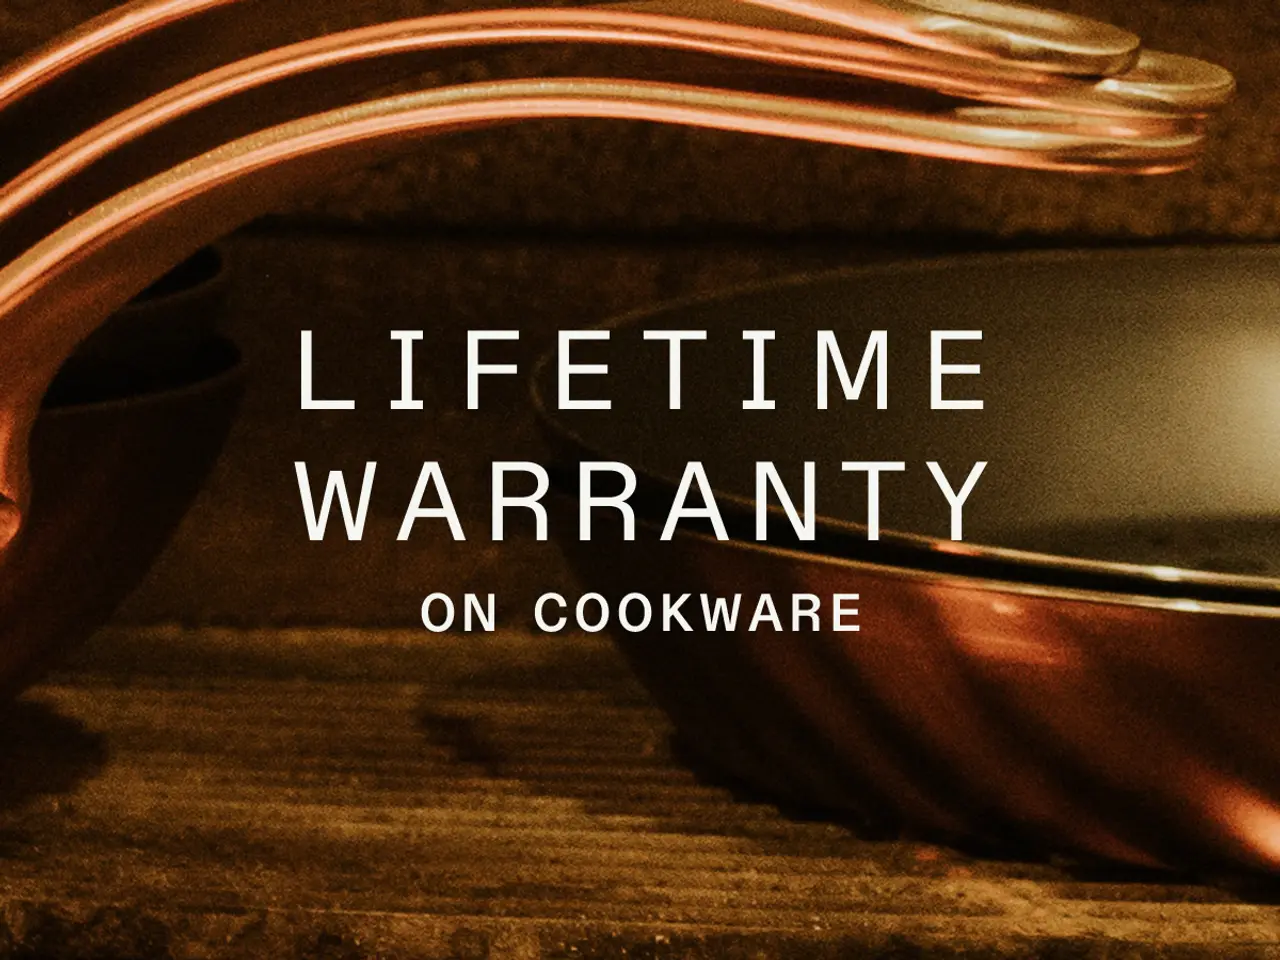 Stacked copper cookware is displayed with the text "LIFETIME WARRANTY ON COOKWARE" emblazoned above.